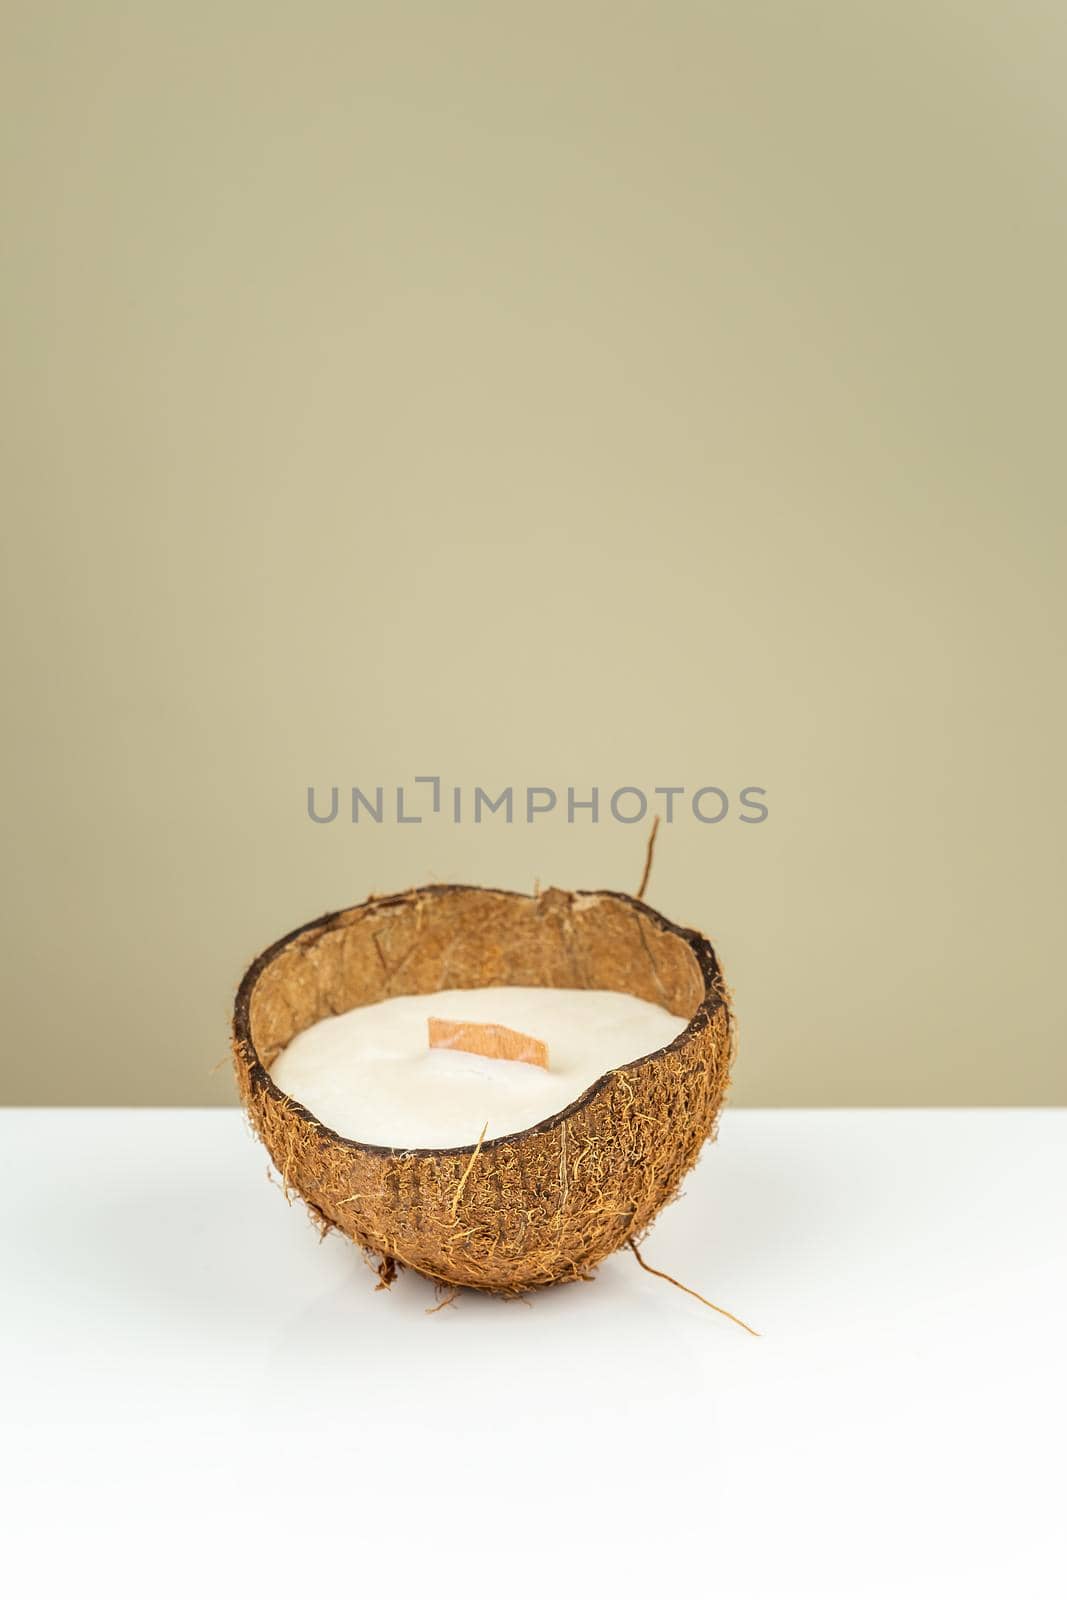 Decorative wax candle in a coconut shell by Syvanych